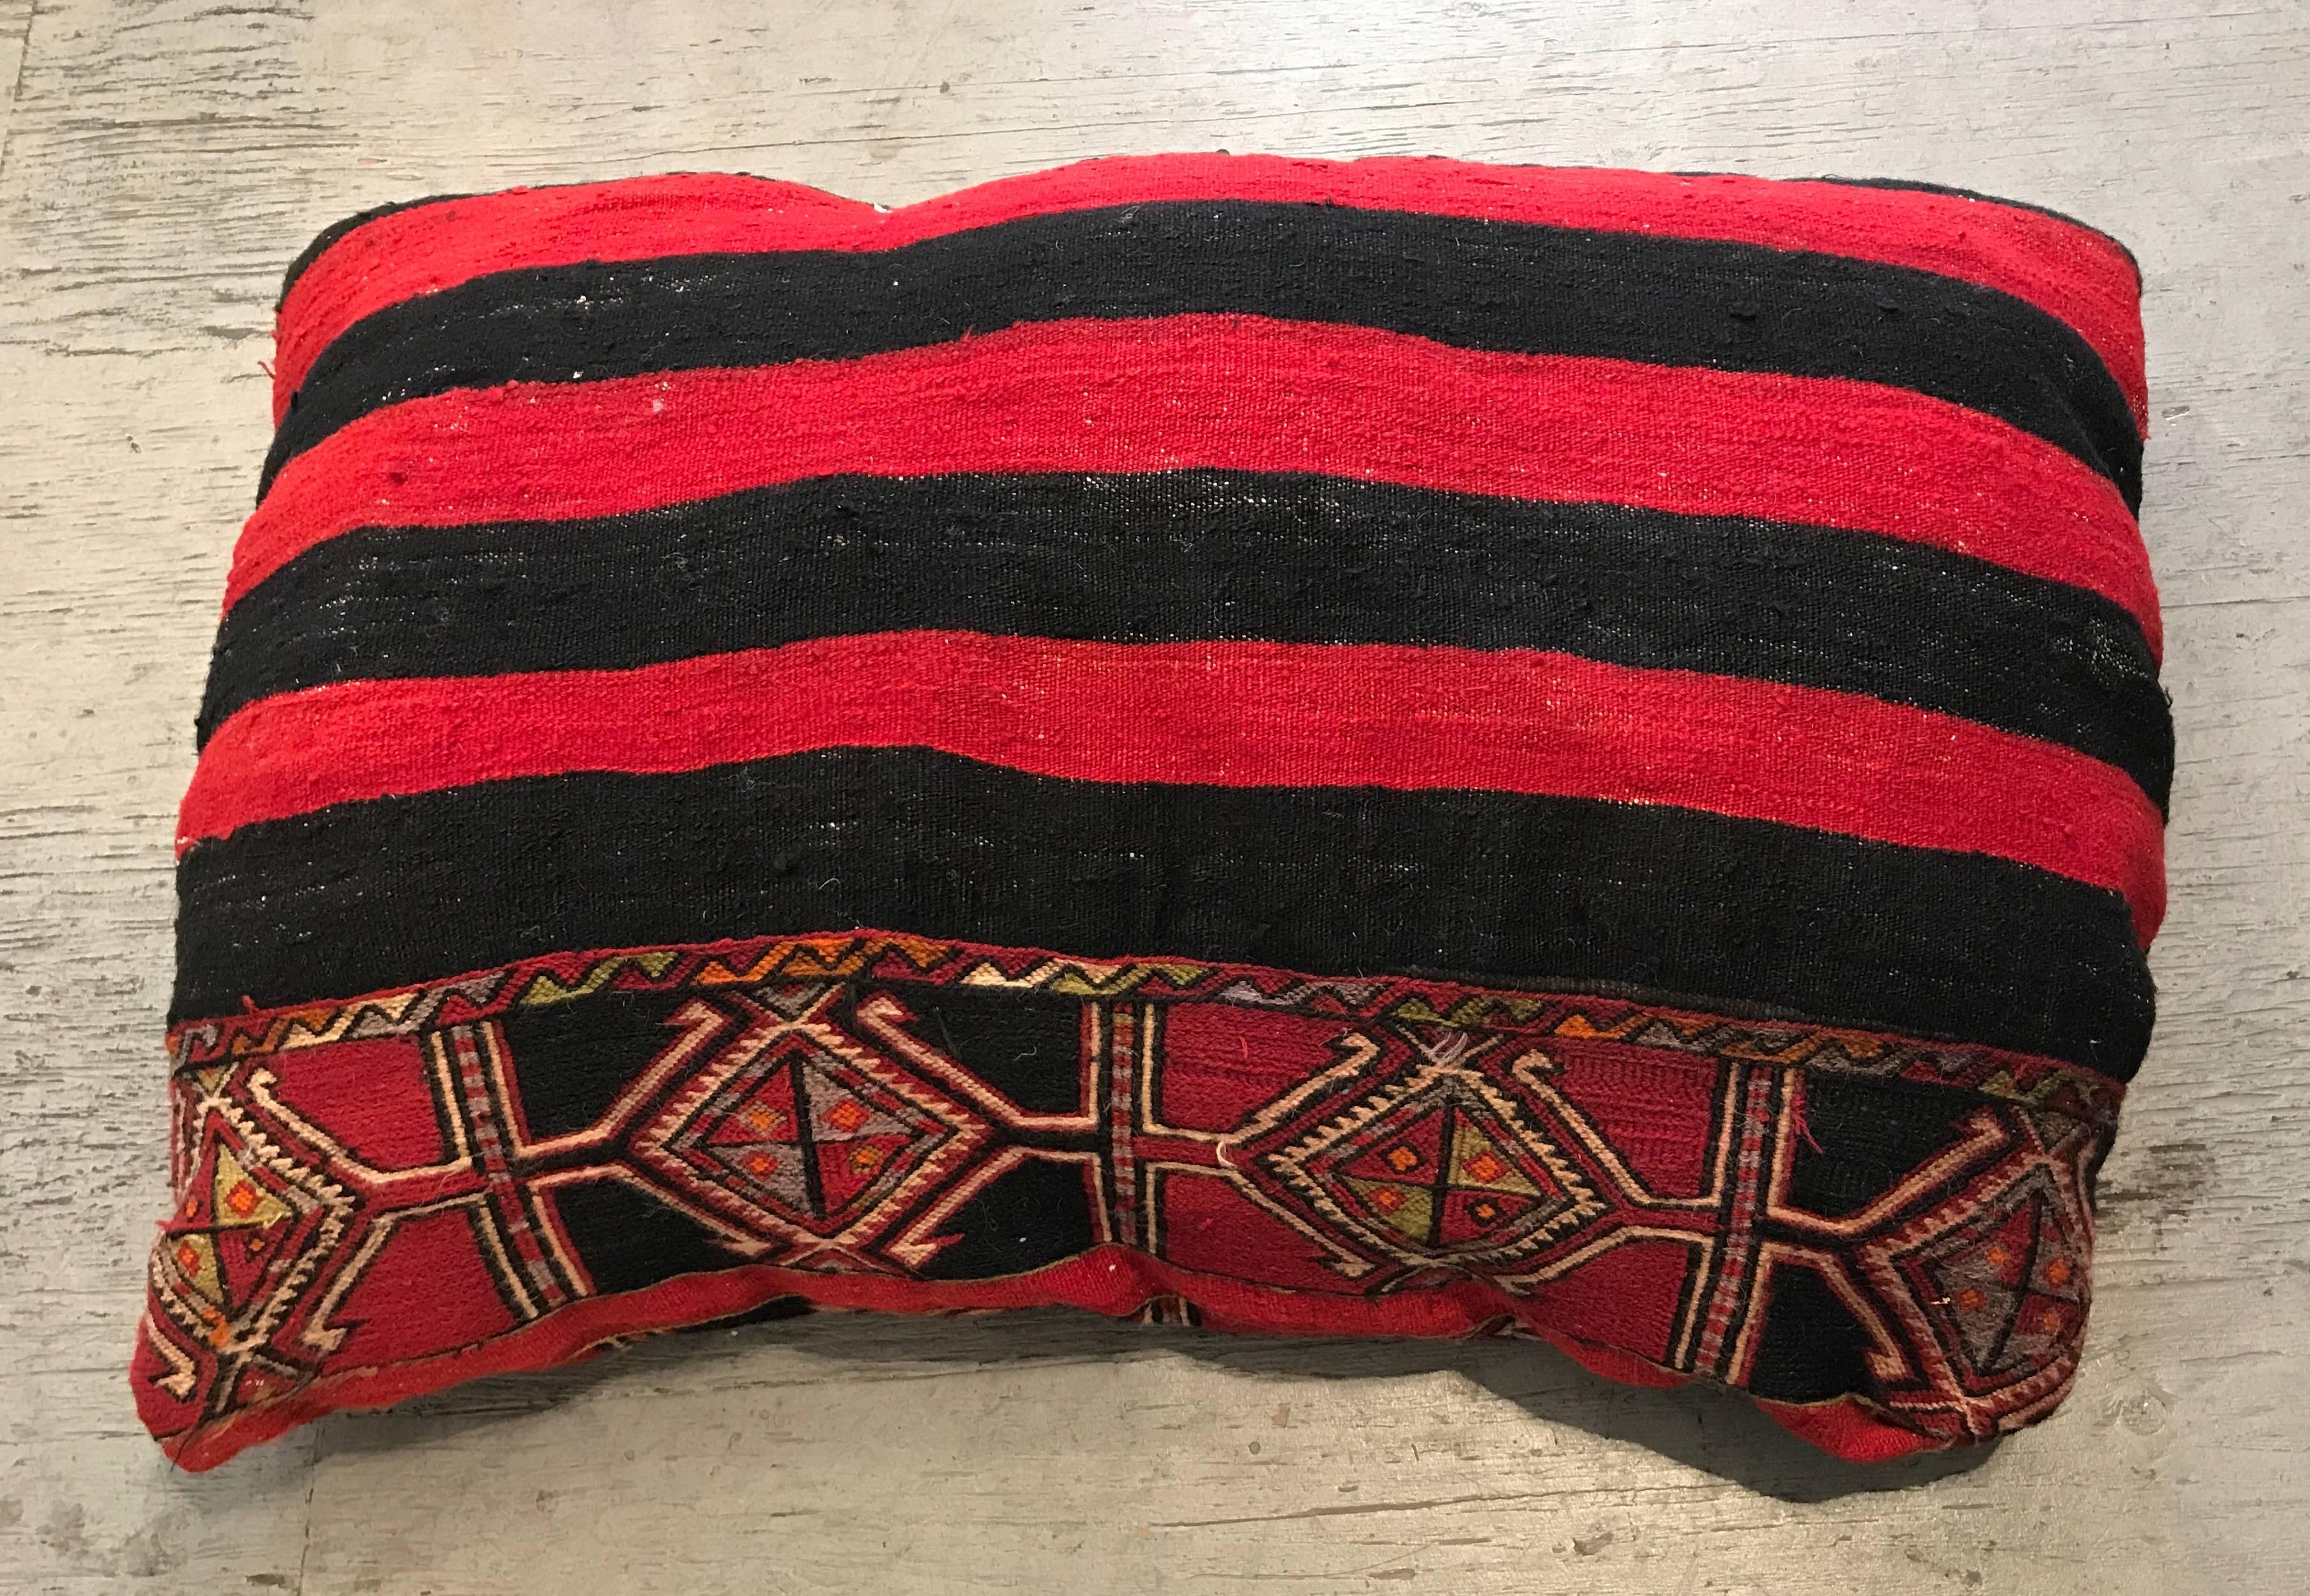 Large wool camel bag Kilim converted into a large sitting pillow, primary colors are black and red.